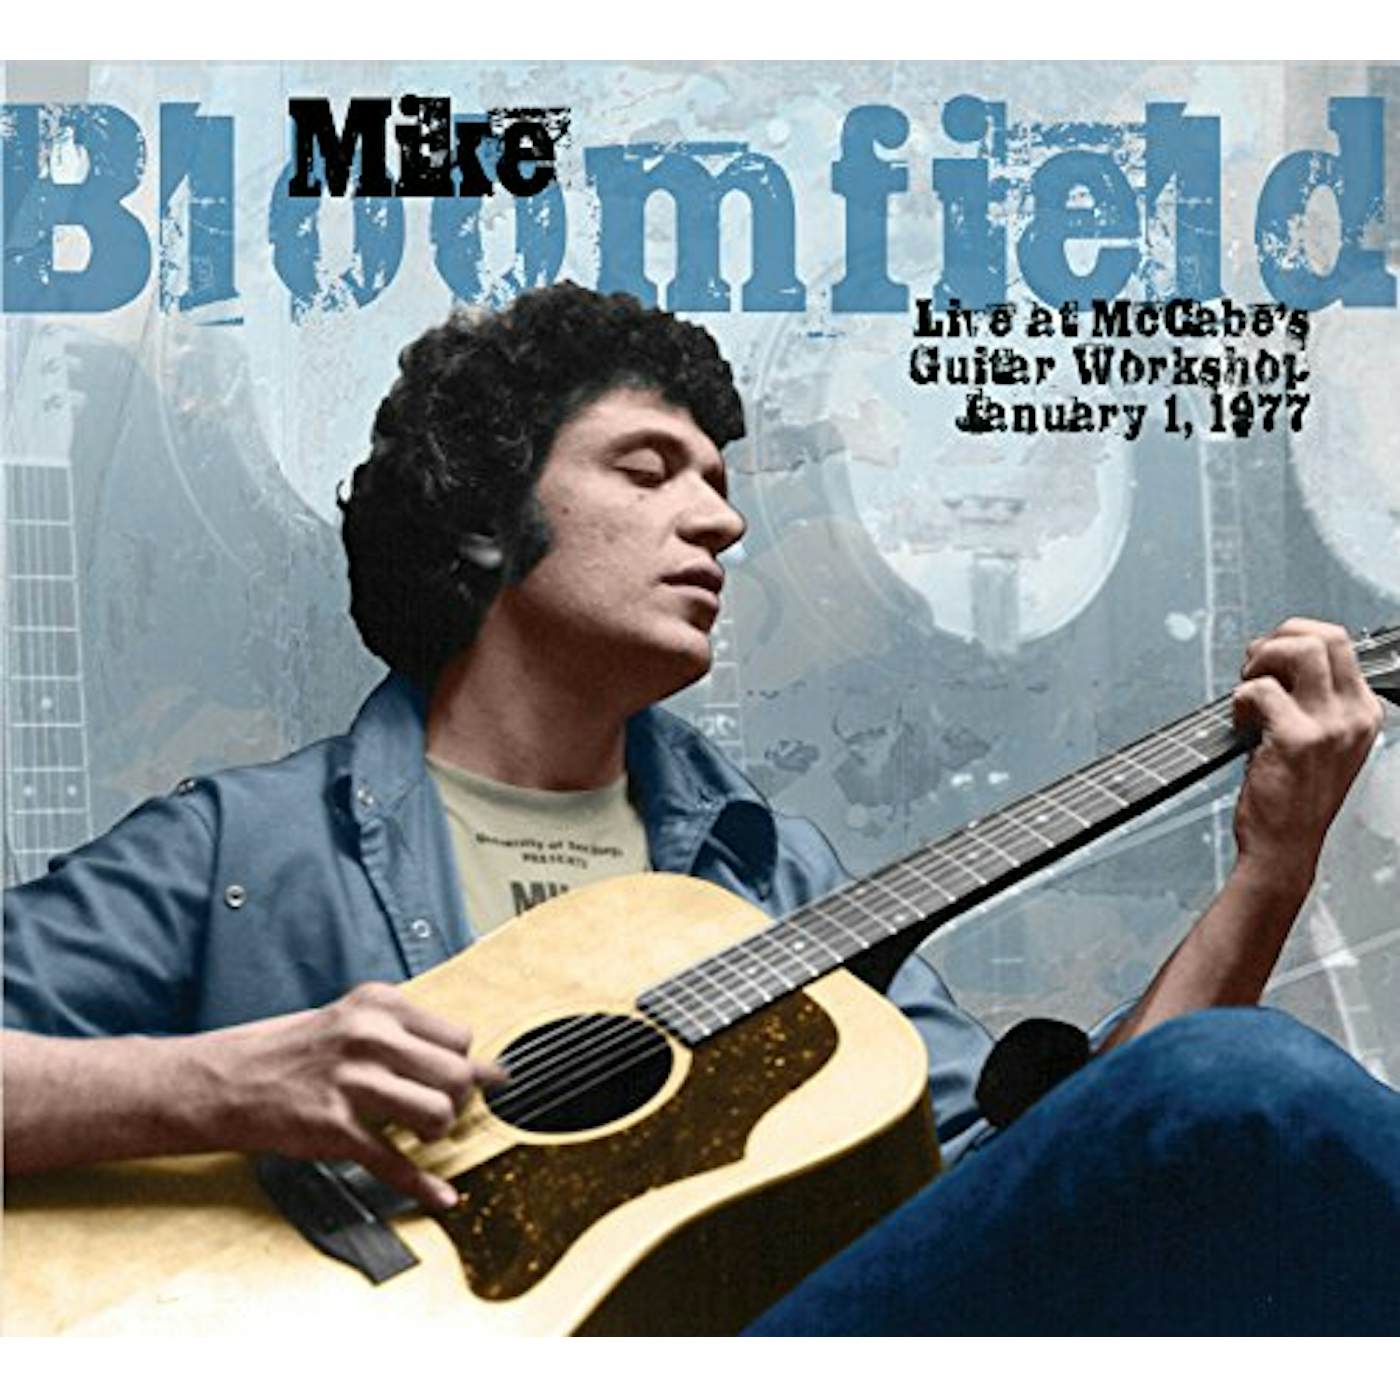 Mike Bloomfield LIVE AT MCCABE'S GUITAR WORKSHOP JANUARY 1 1977 CD